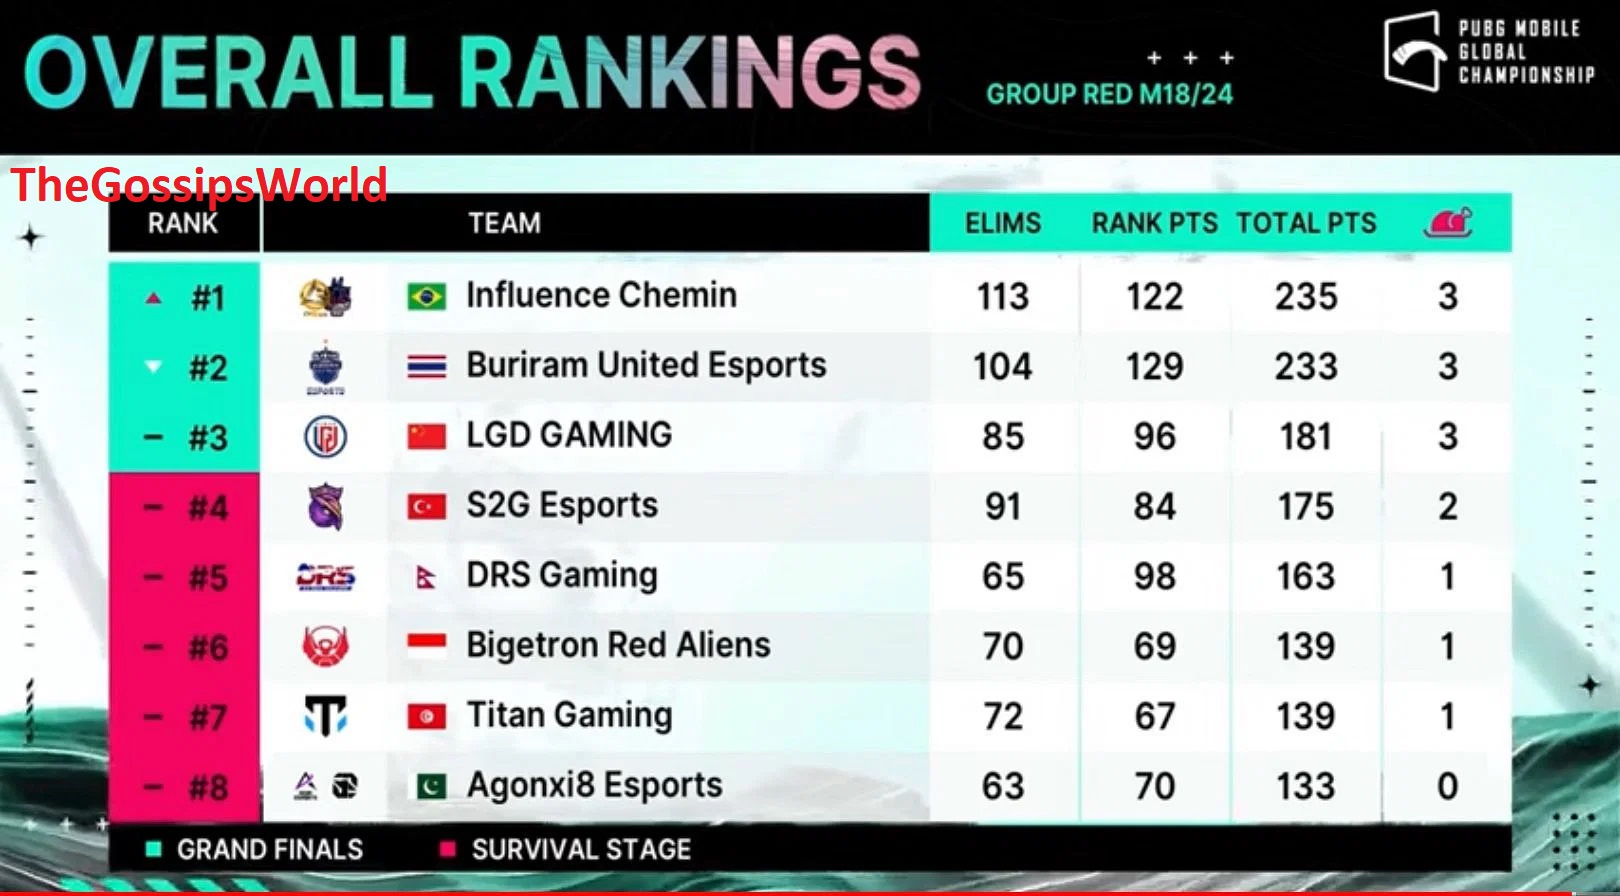 When To Watch PMGC League Group Red Day 4?